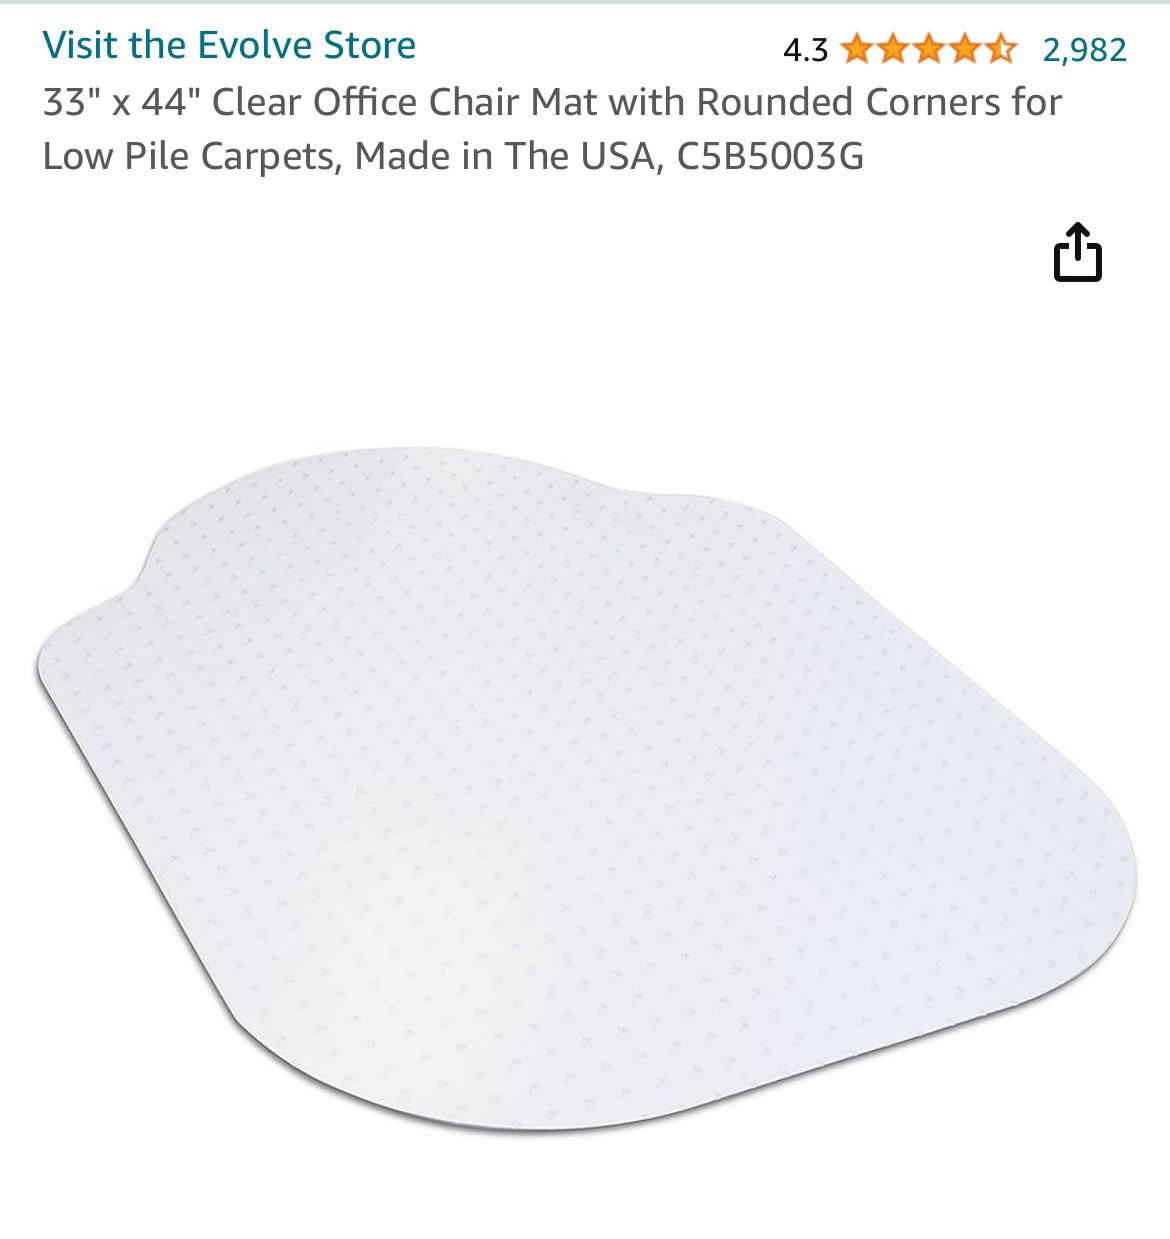 33" x 44" Clear Office Chair Mat with Rounded Corners for Low Pile Carpets, Made in The USA